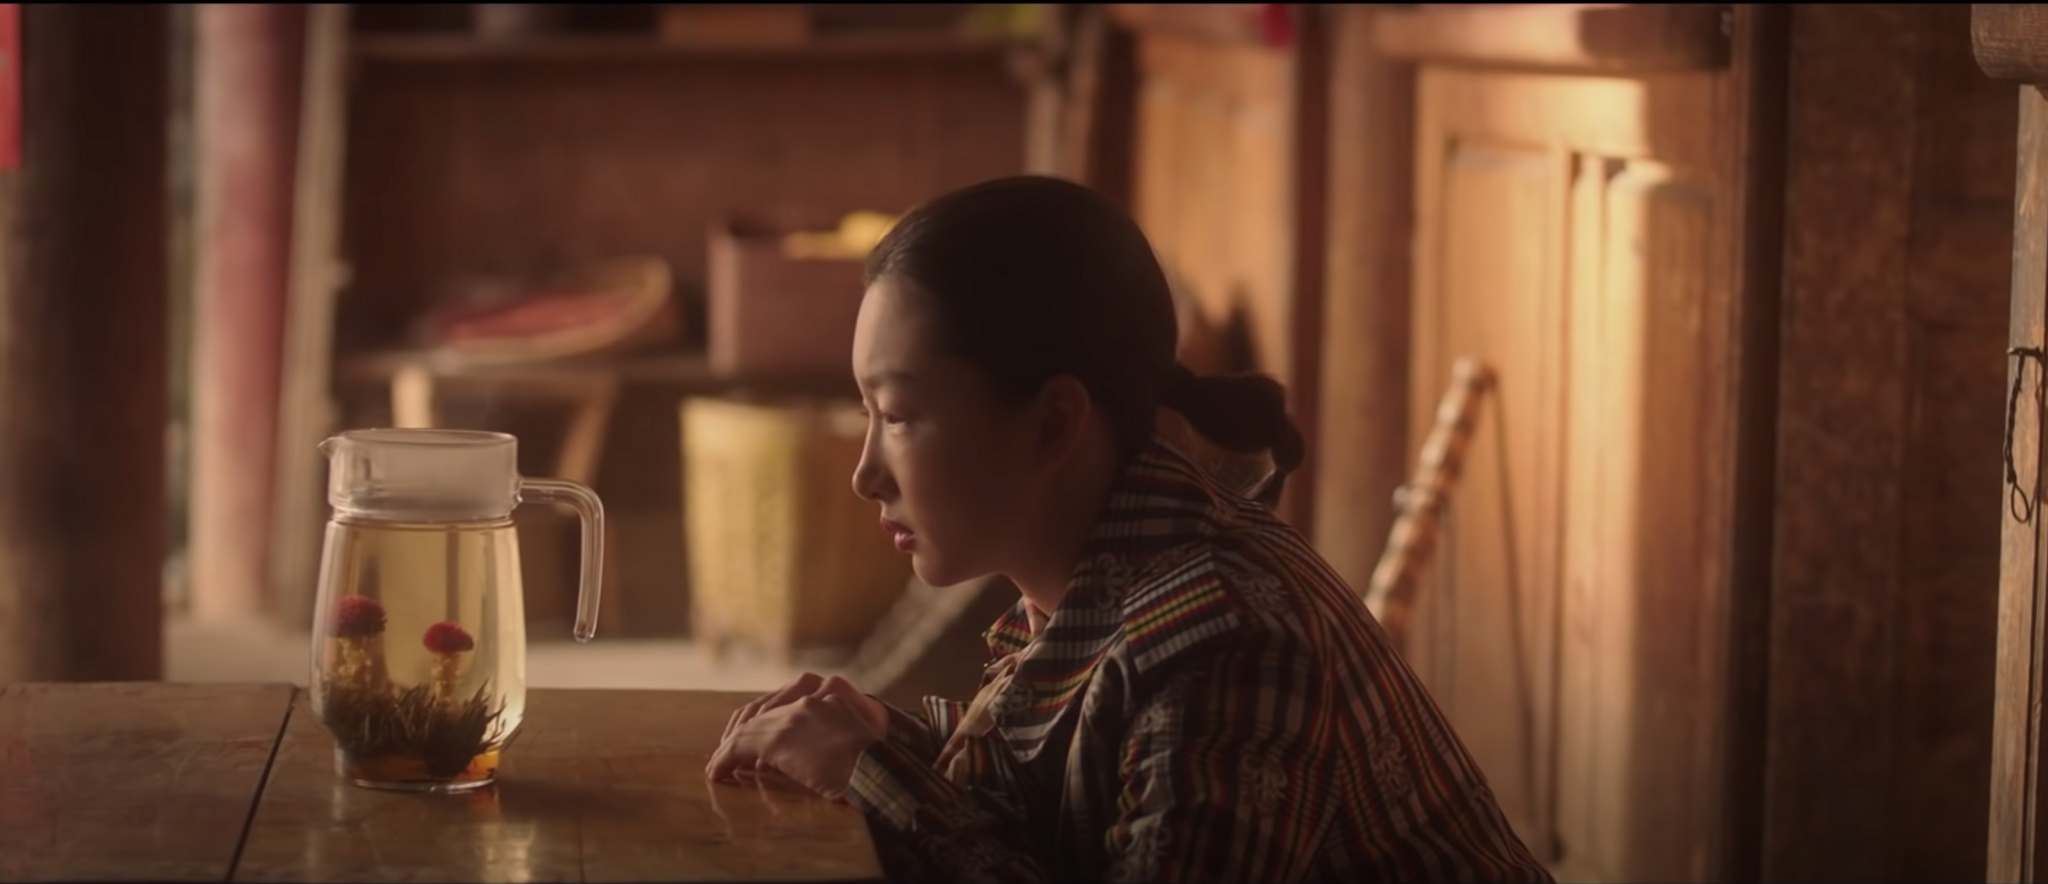 Burberry's Chinese New Year ad depicts a new awakening